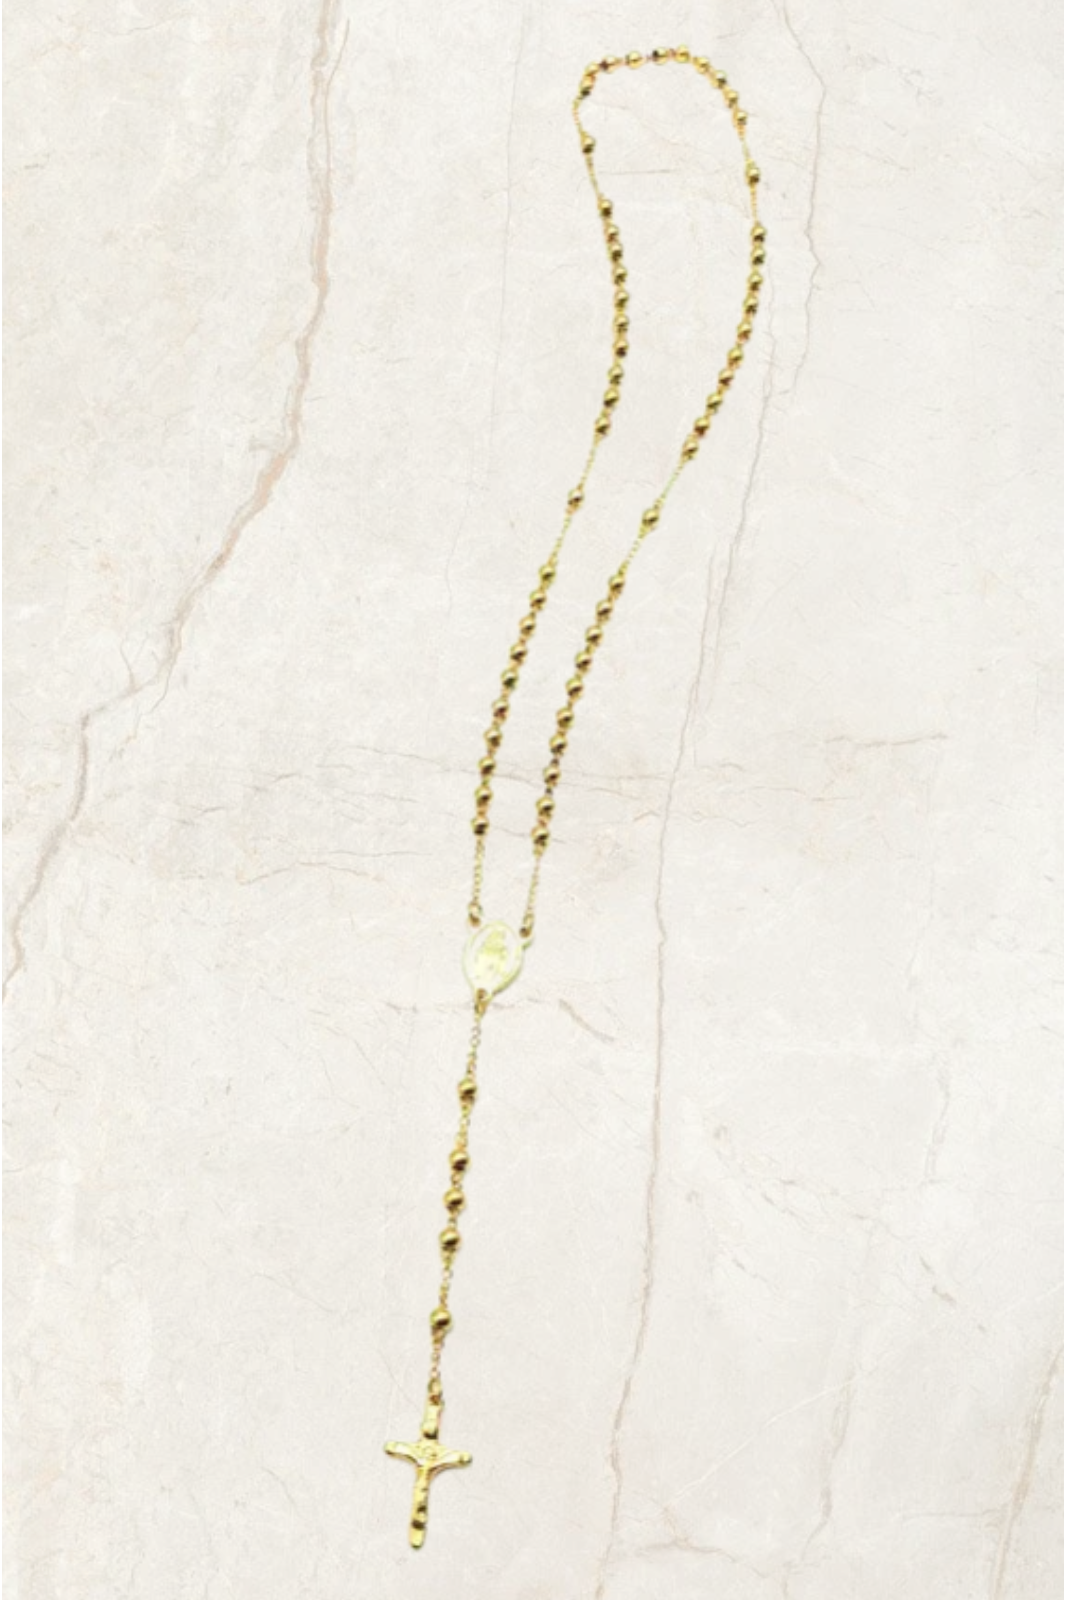 Chrysalini Jewellery Rosemary Necklace in Gold/Gold